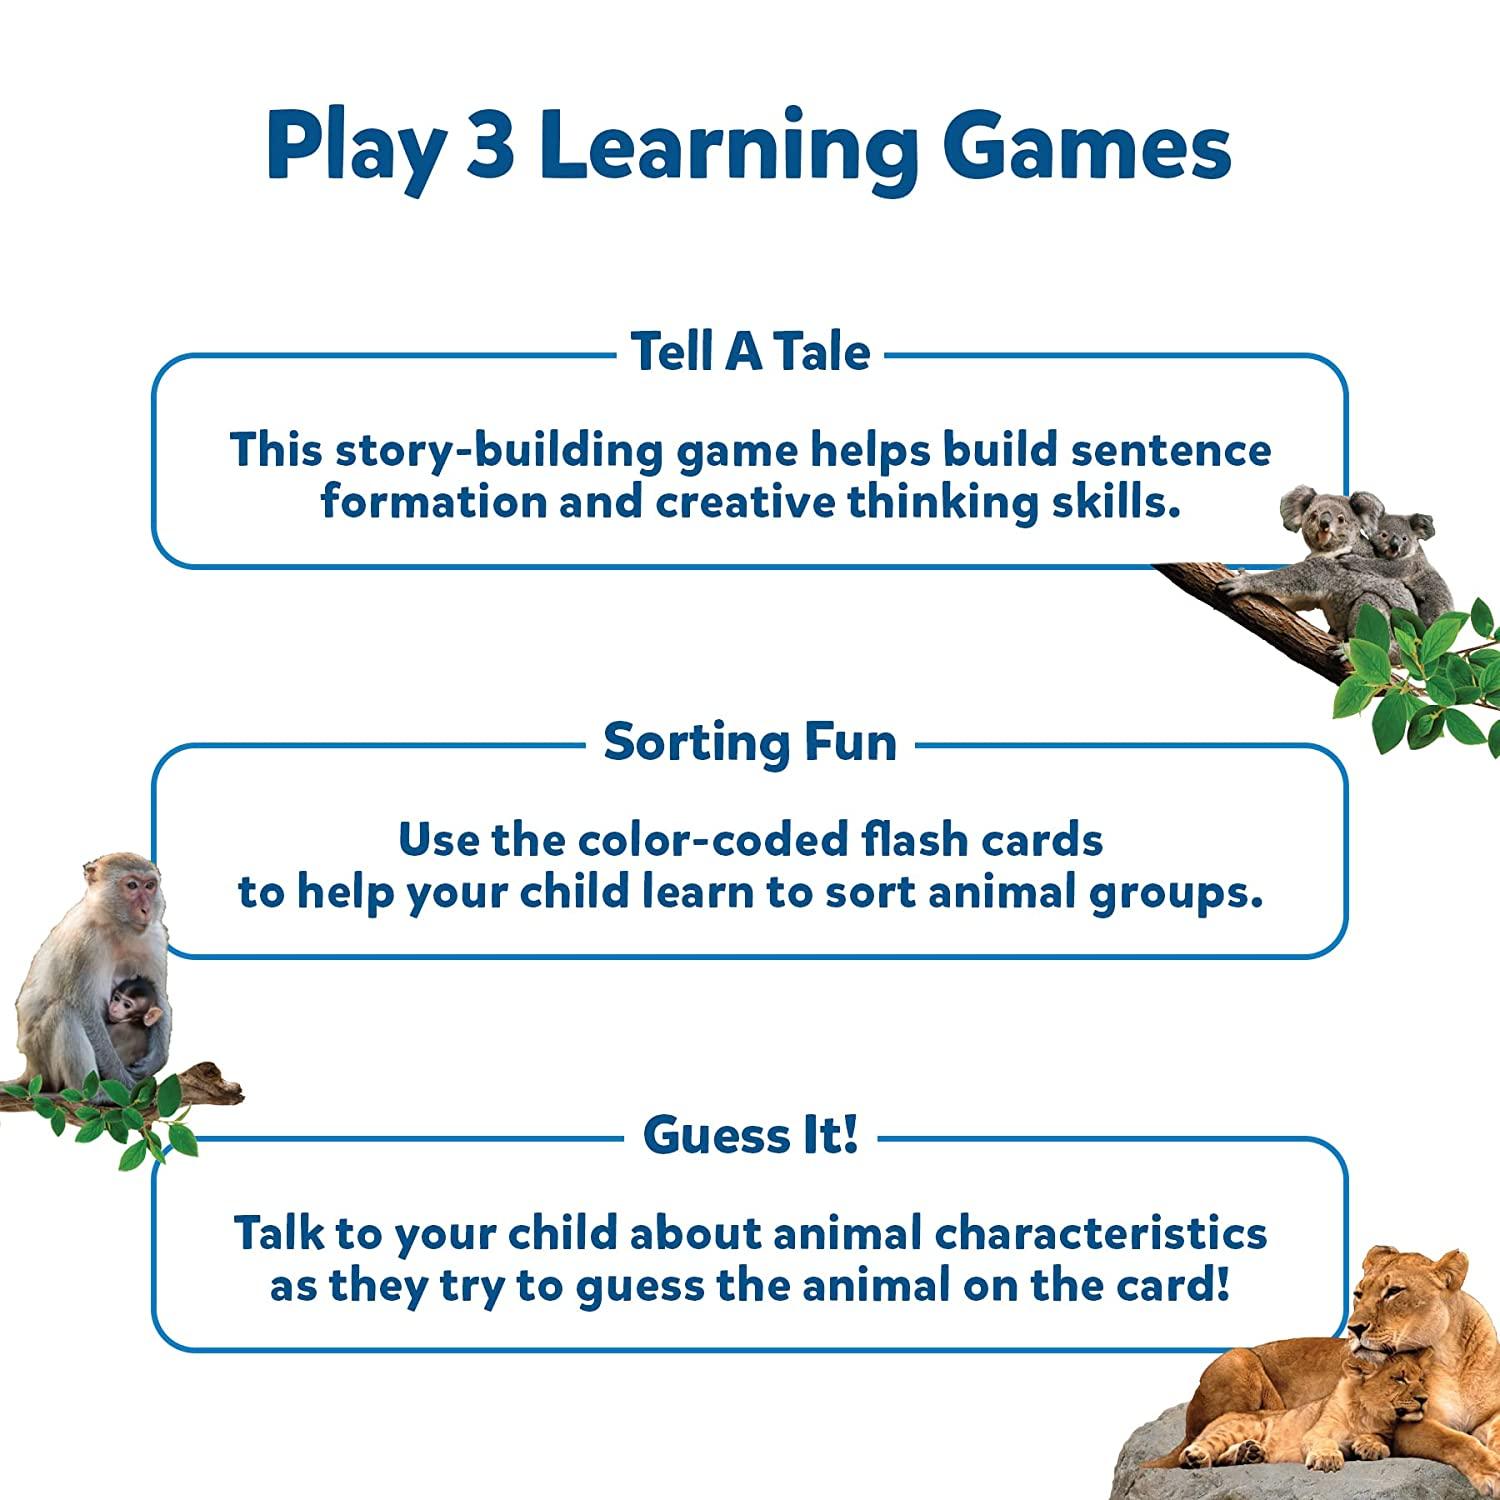 Skillmatics Animals & Their Babies - 3 in 1 Educational Flash Cards for Ages 2+ - FunCorp India